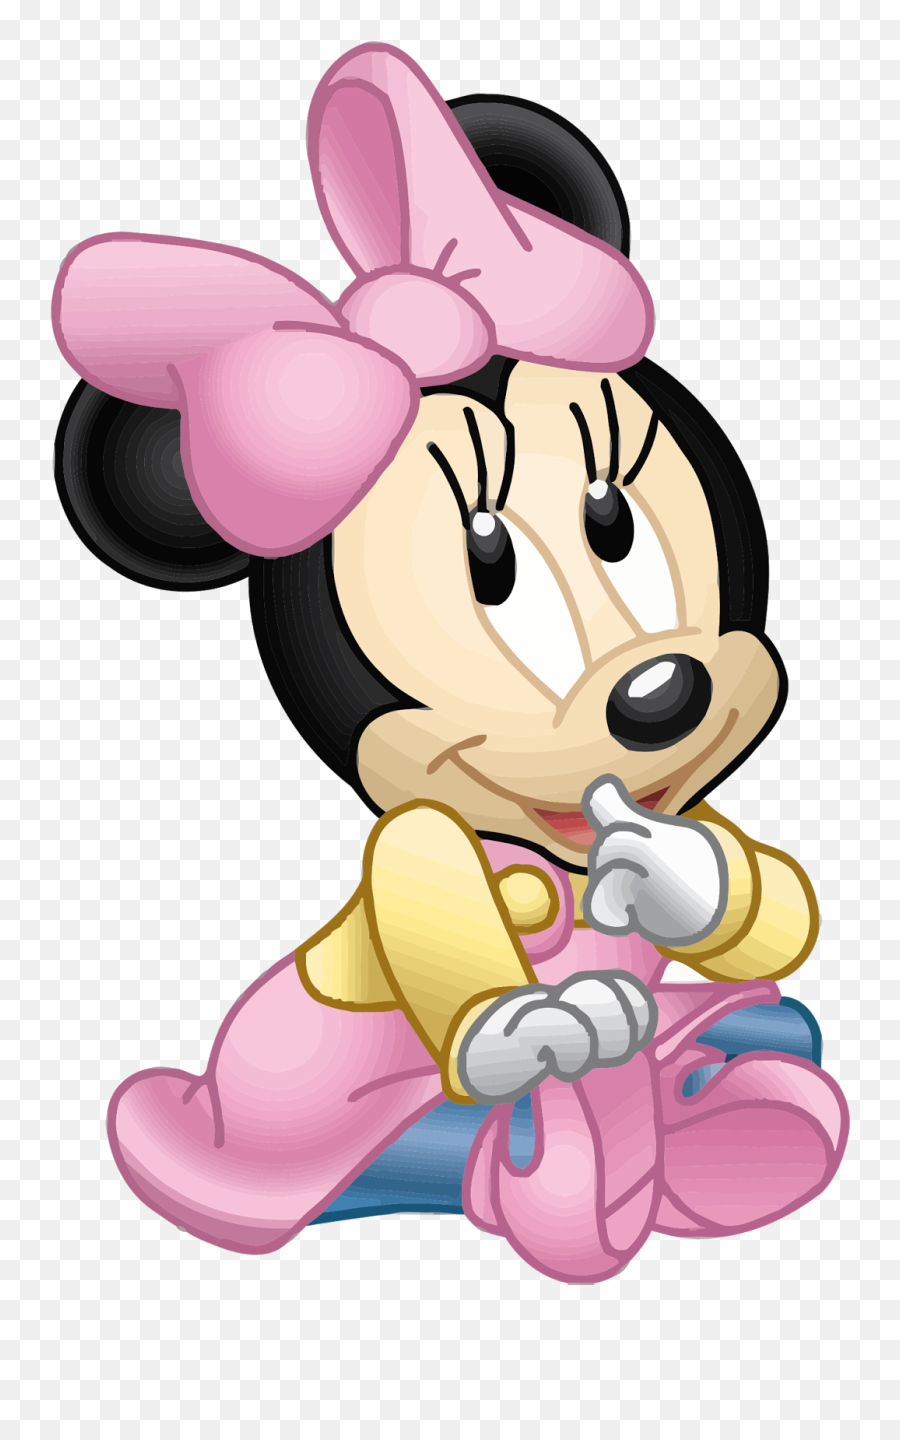 Baby Minnie Mouse Images Emoji,Minnie Mouse Png